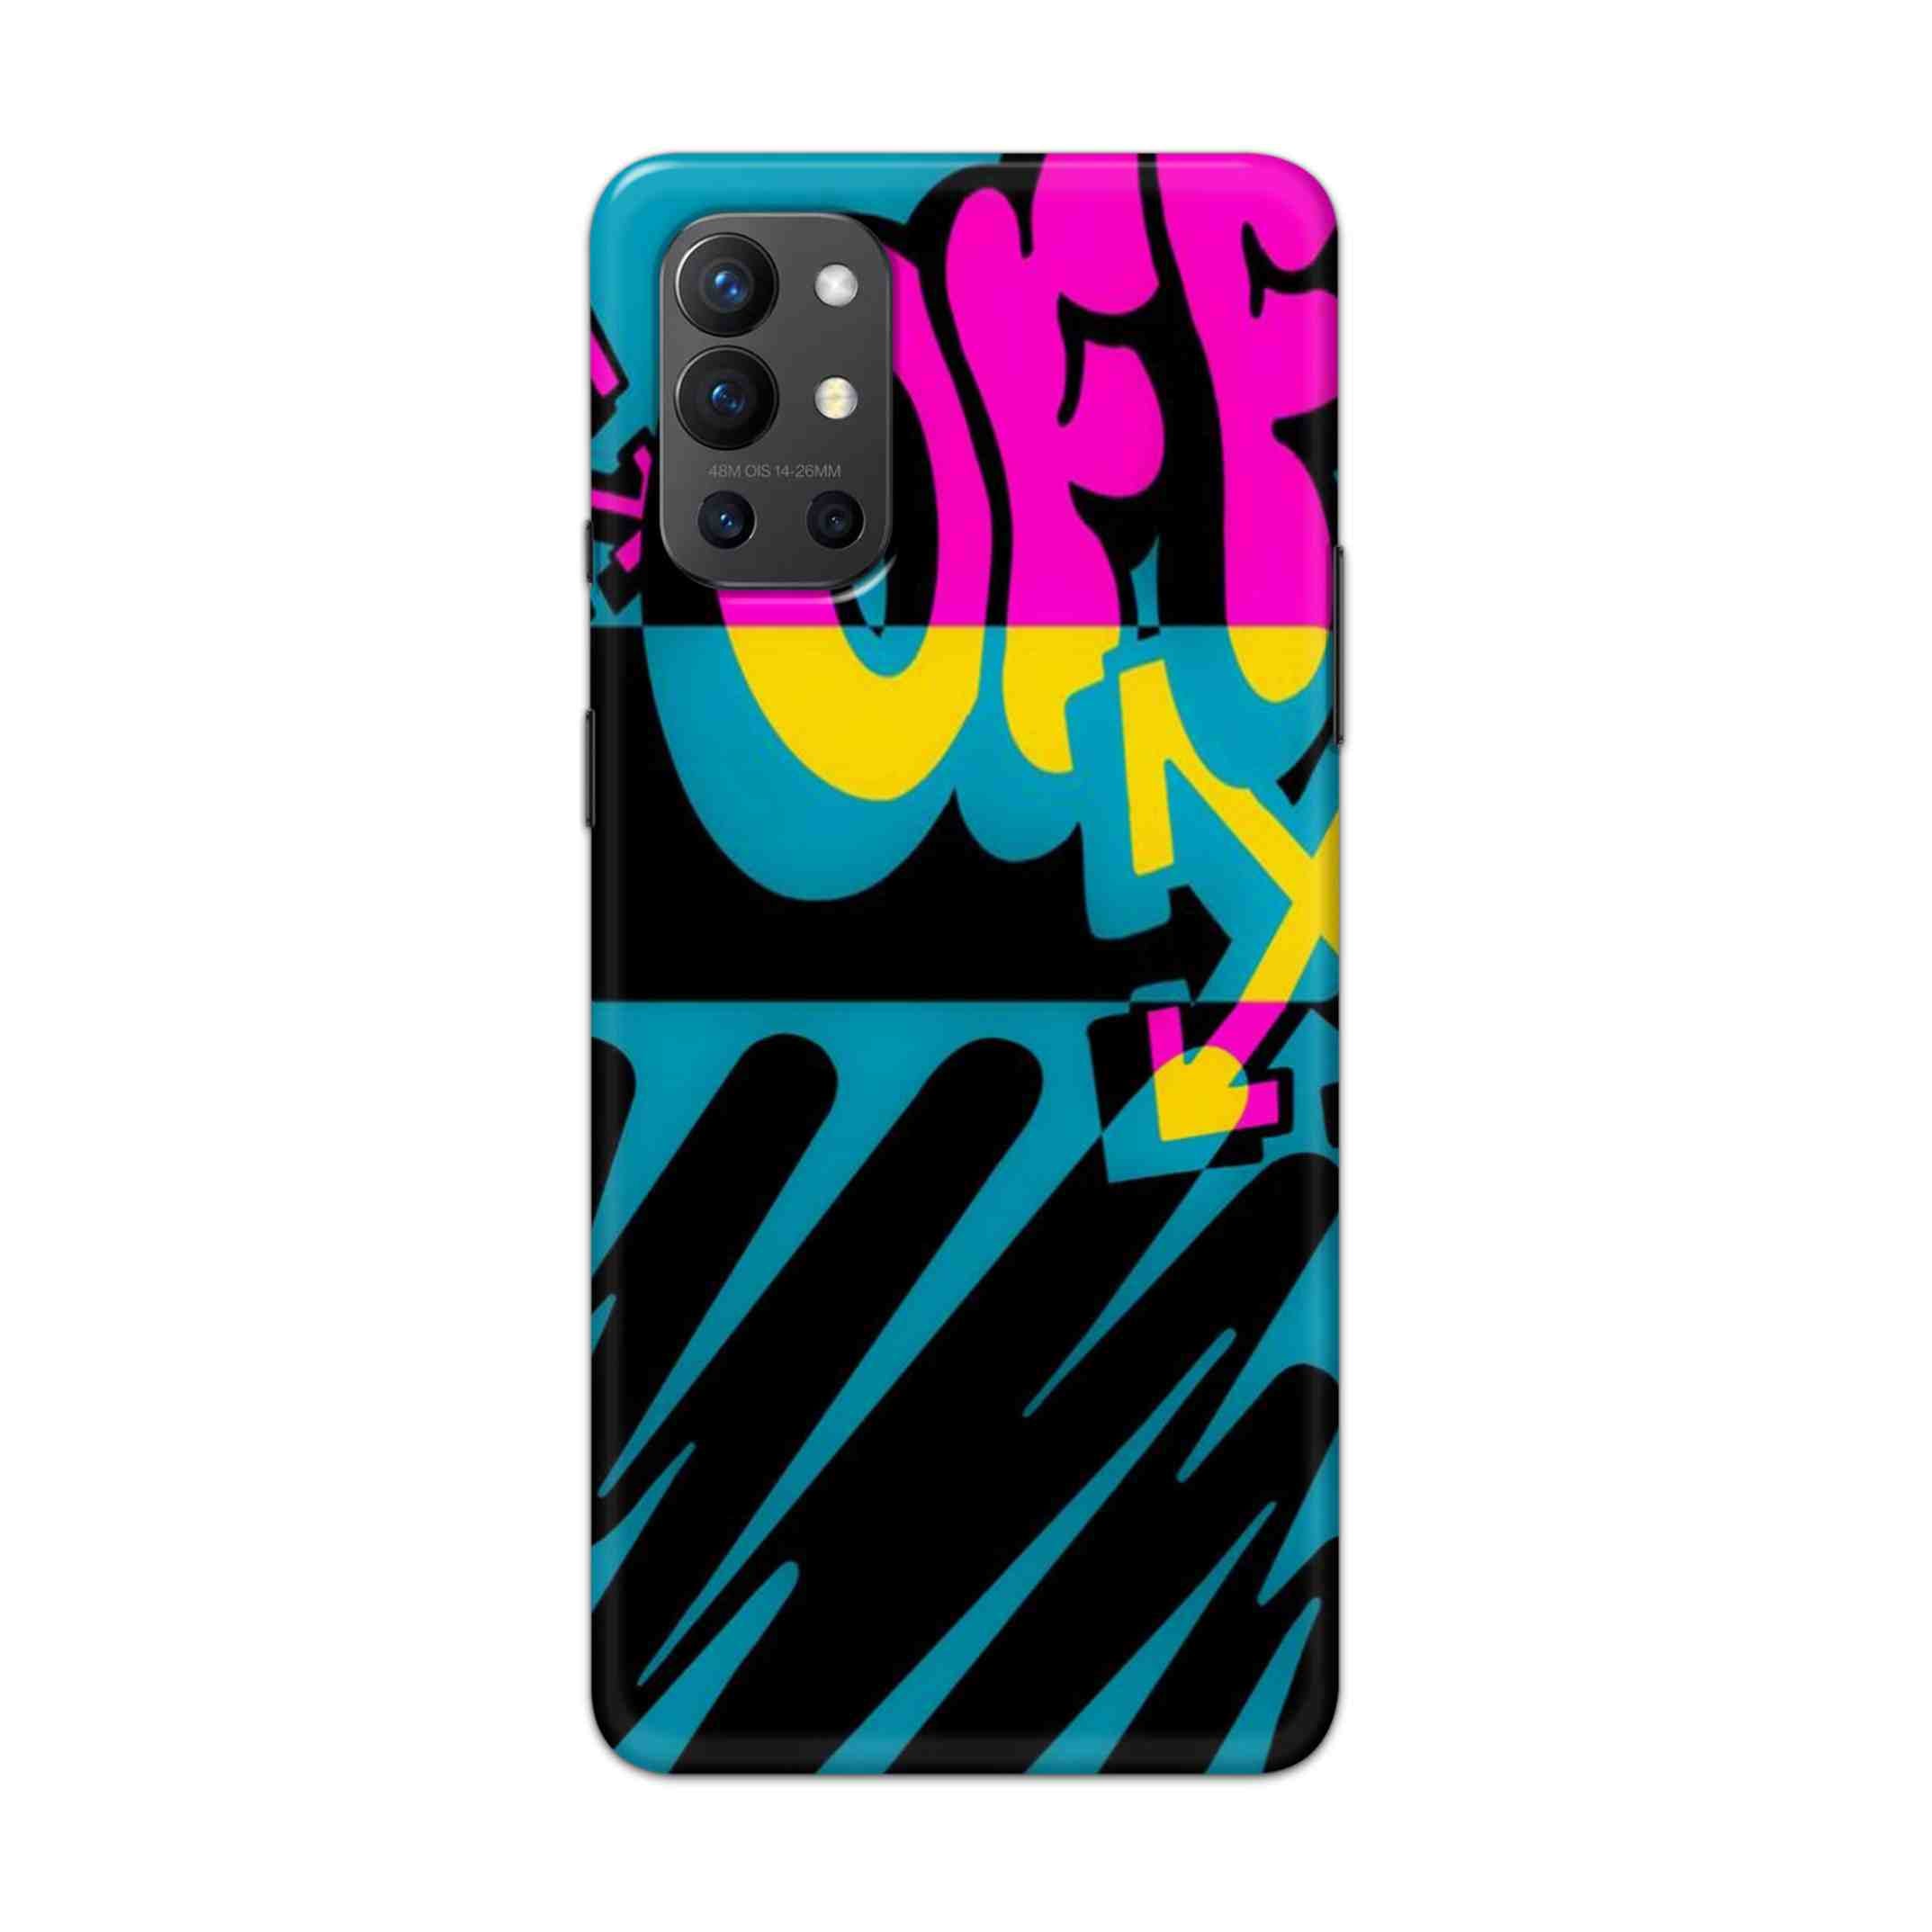 Buy Off Hard Back Mobile Phone Case Cover For OnePlus 9R / 8T Online